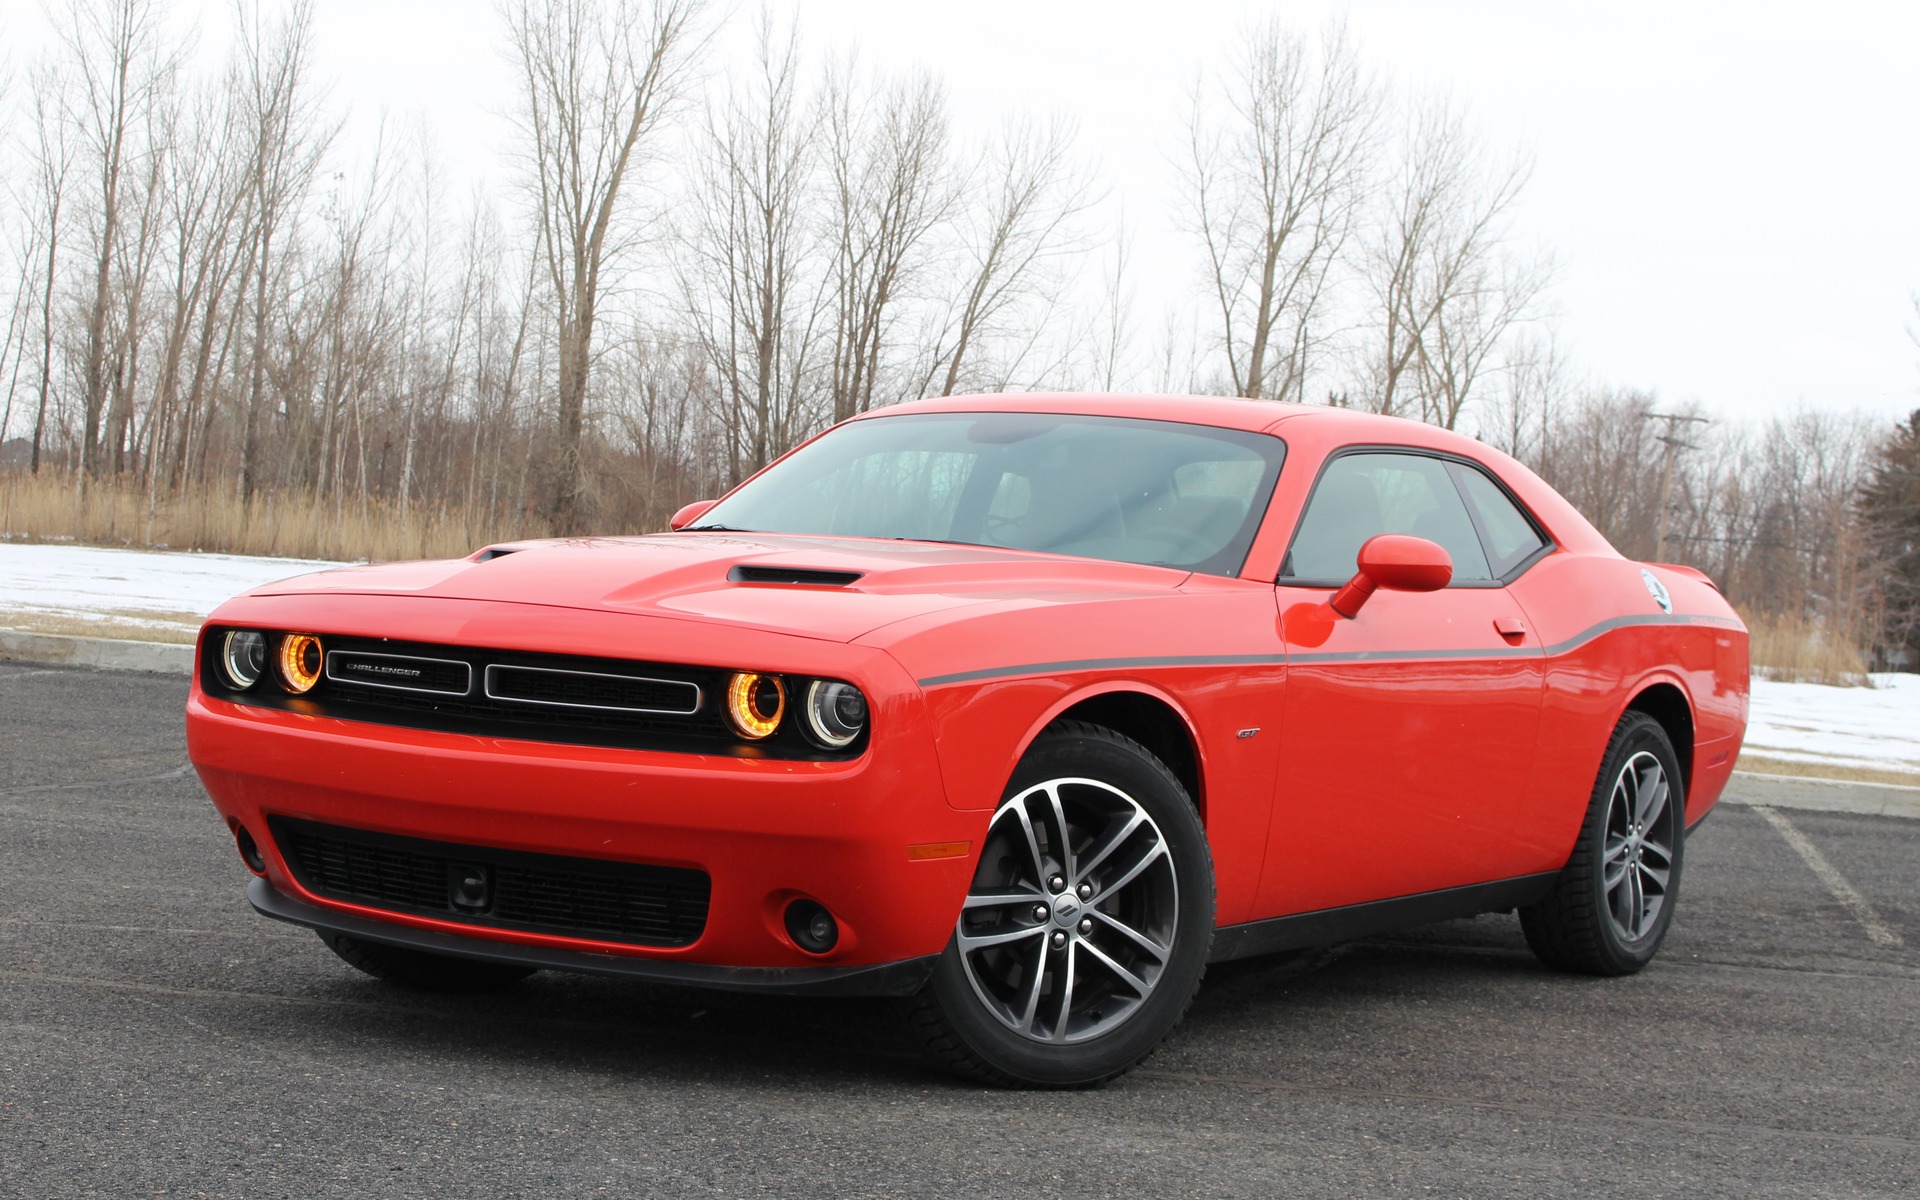 2018 Dodge Challenger GT: Twelve Months a Year - The Car Guide